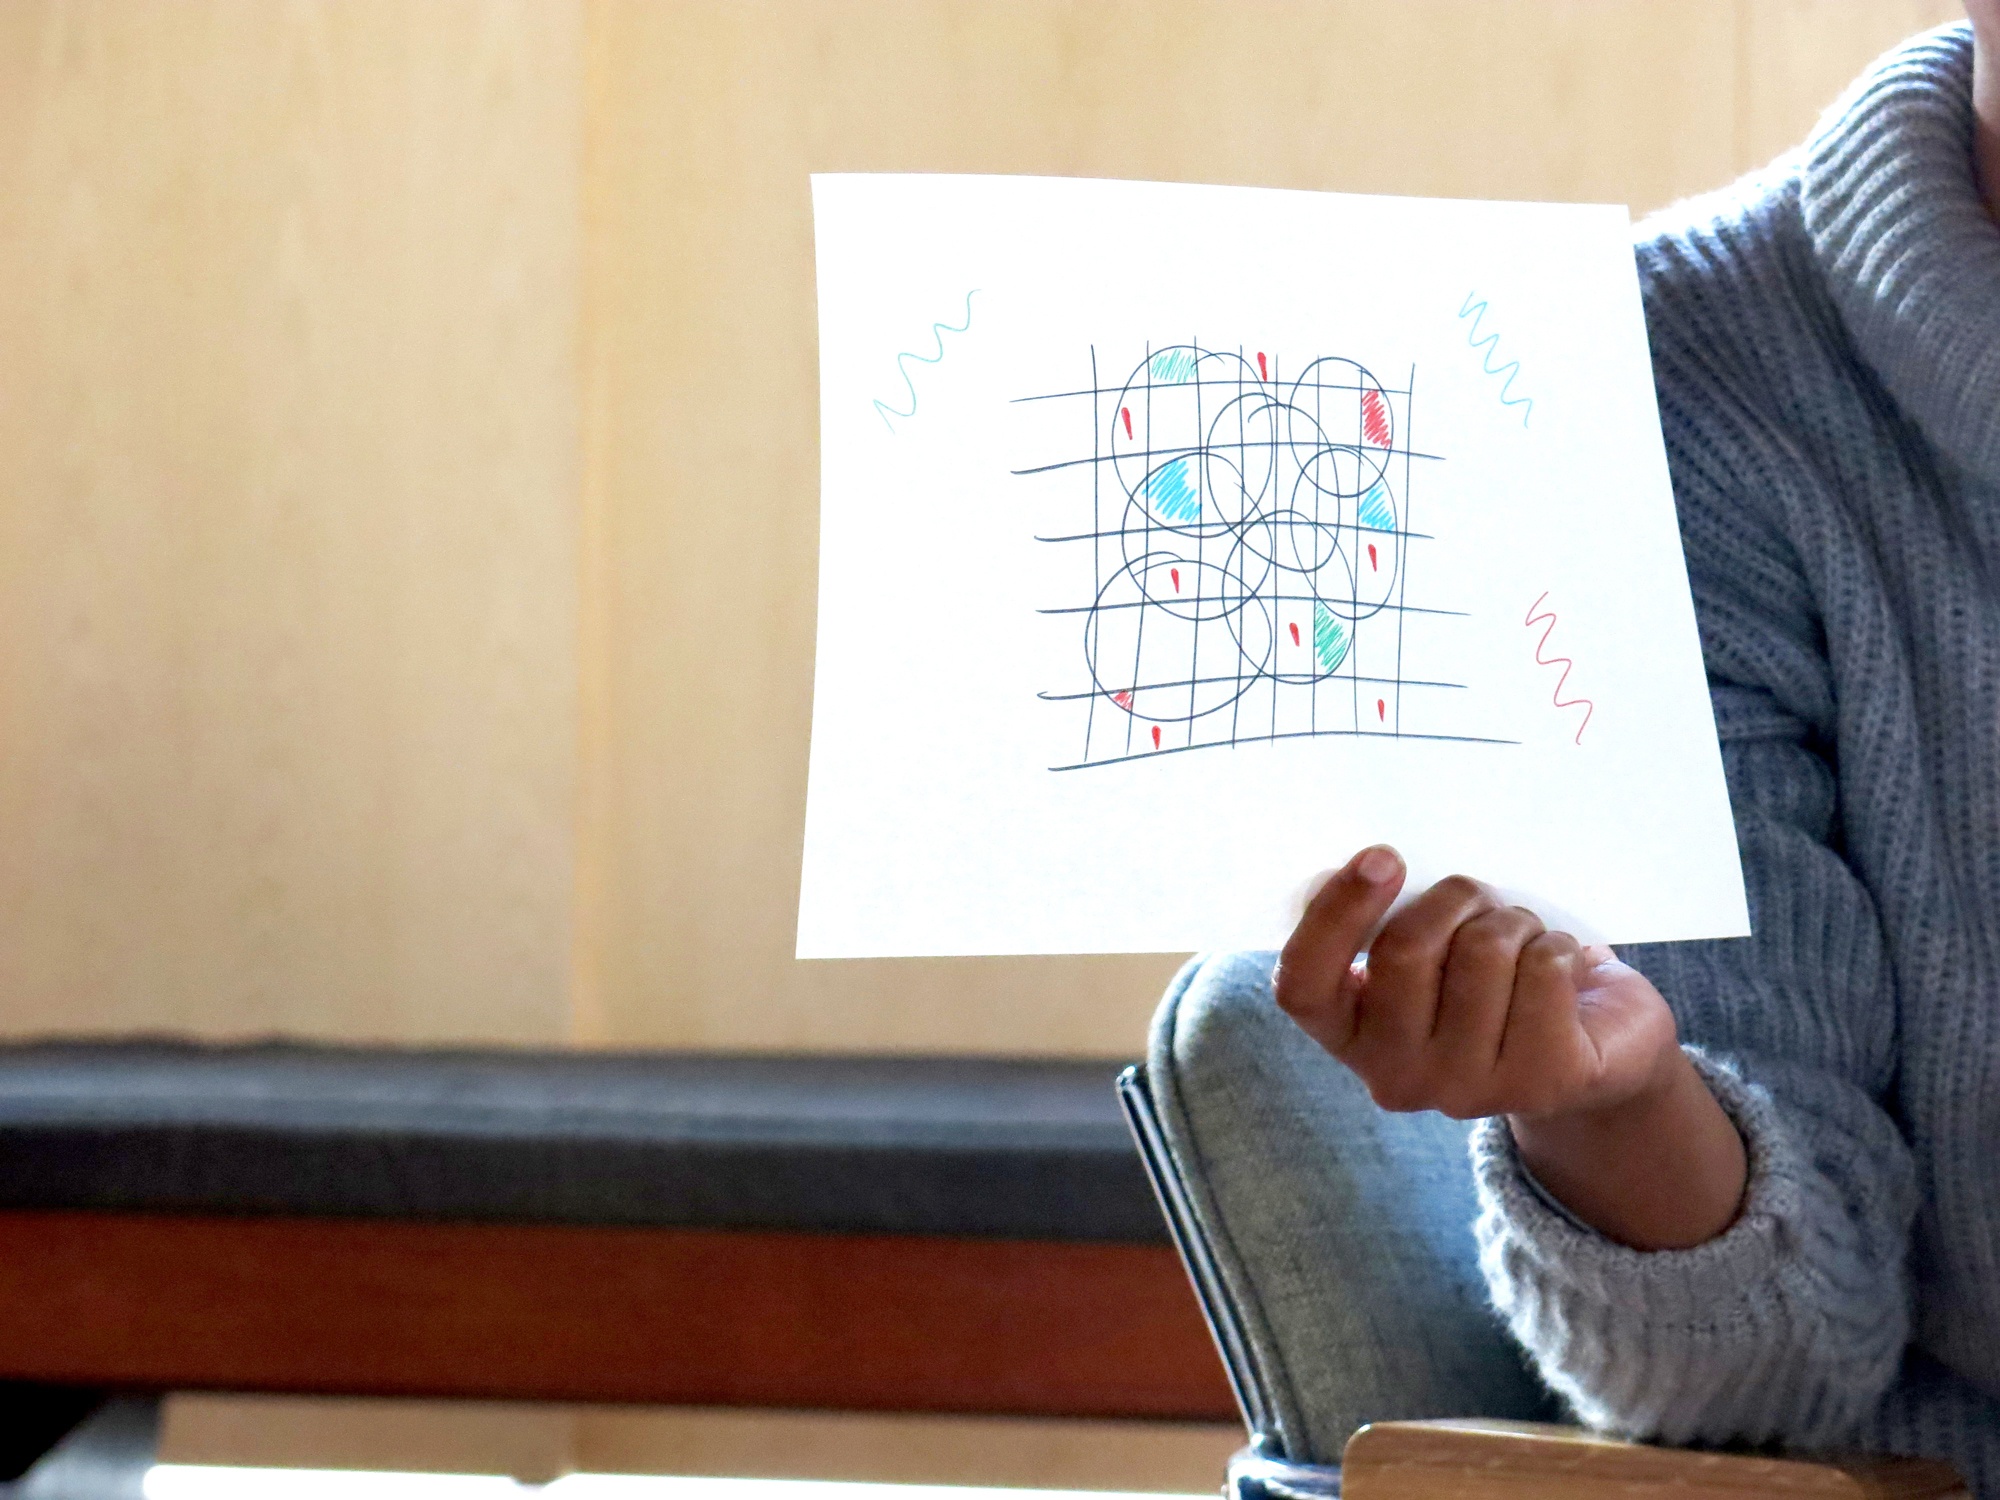 Event photograph from the 2018 rendition of the City Research Studio exchange with the African Centre for Cities. An individual is holding a paper with a felt pen marker drawing that consists of a grid with overlapping circles and drawing marks of various colours.
